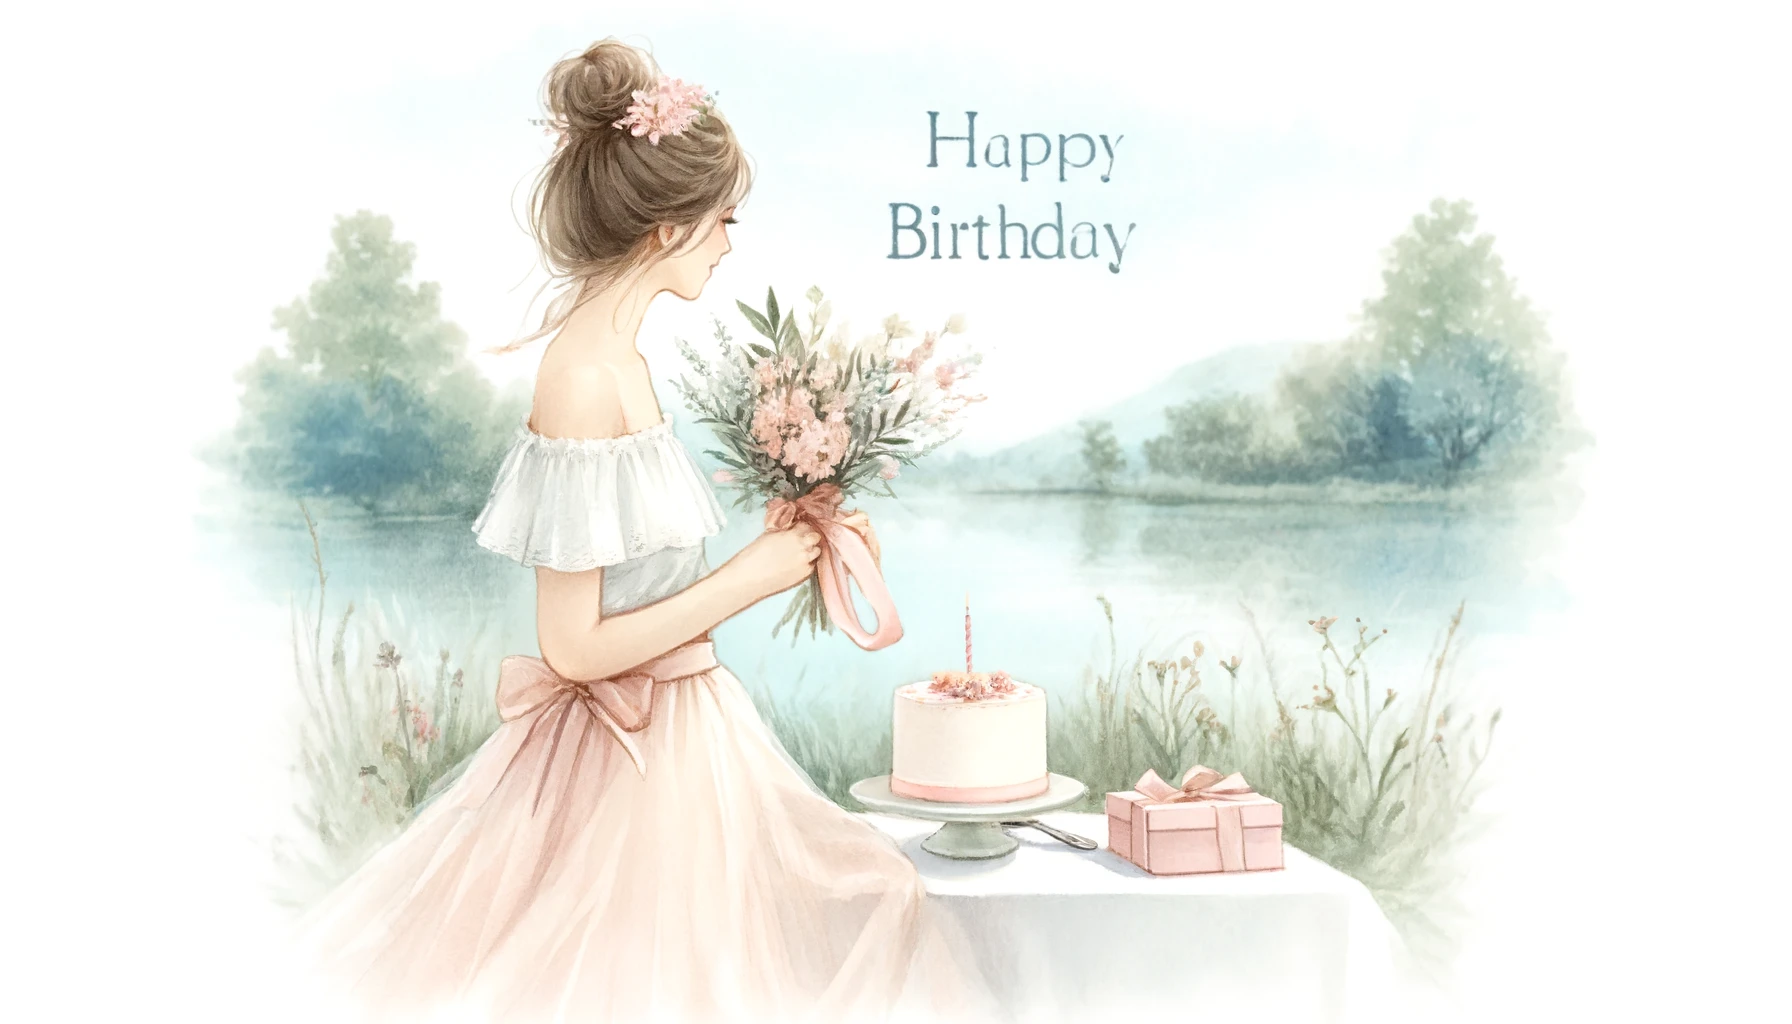 Birthday Wishes for a Beautiful Grandmother in a Respectful Tone